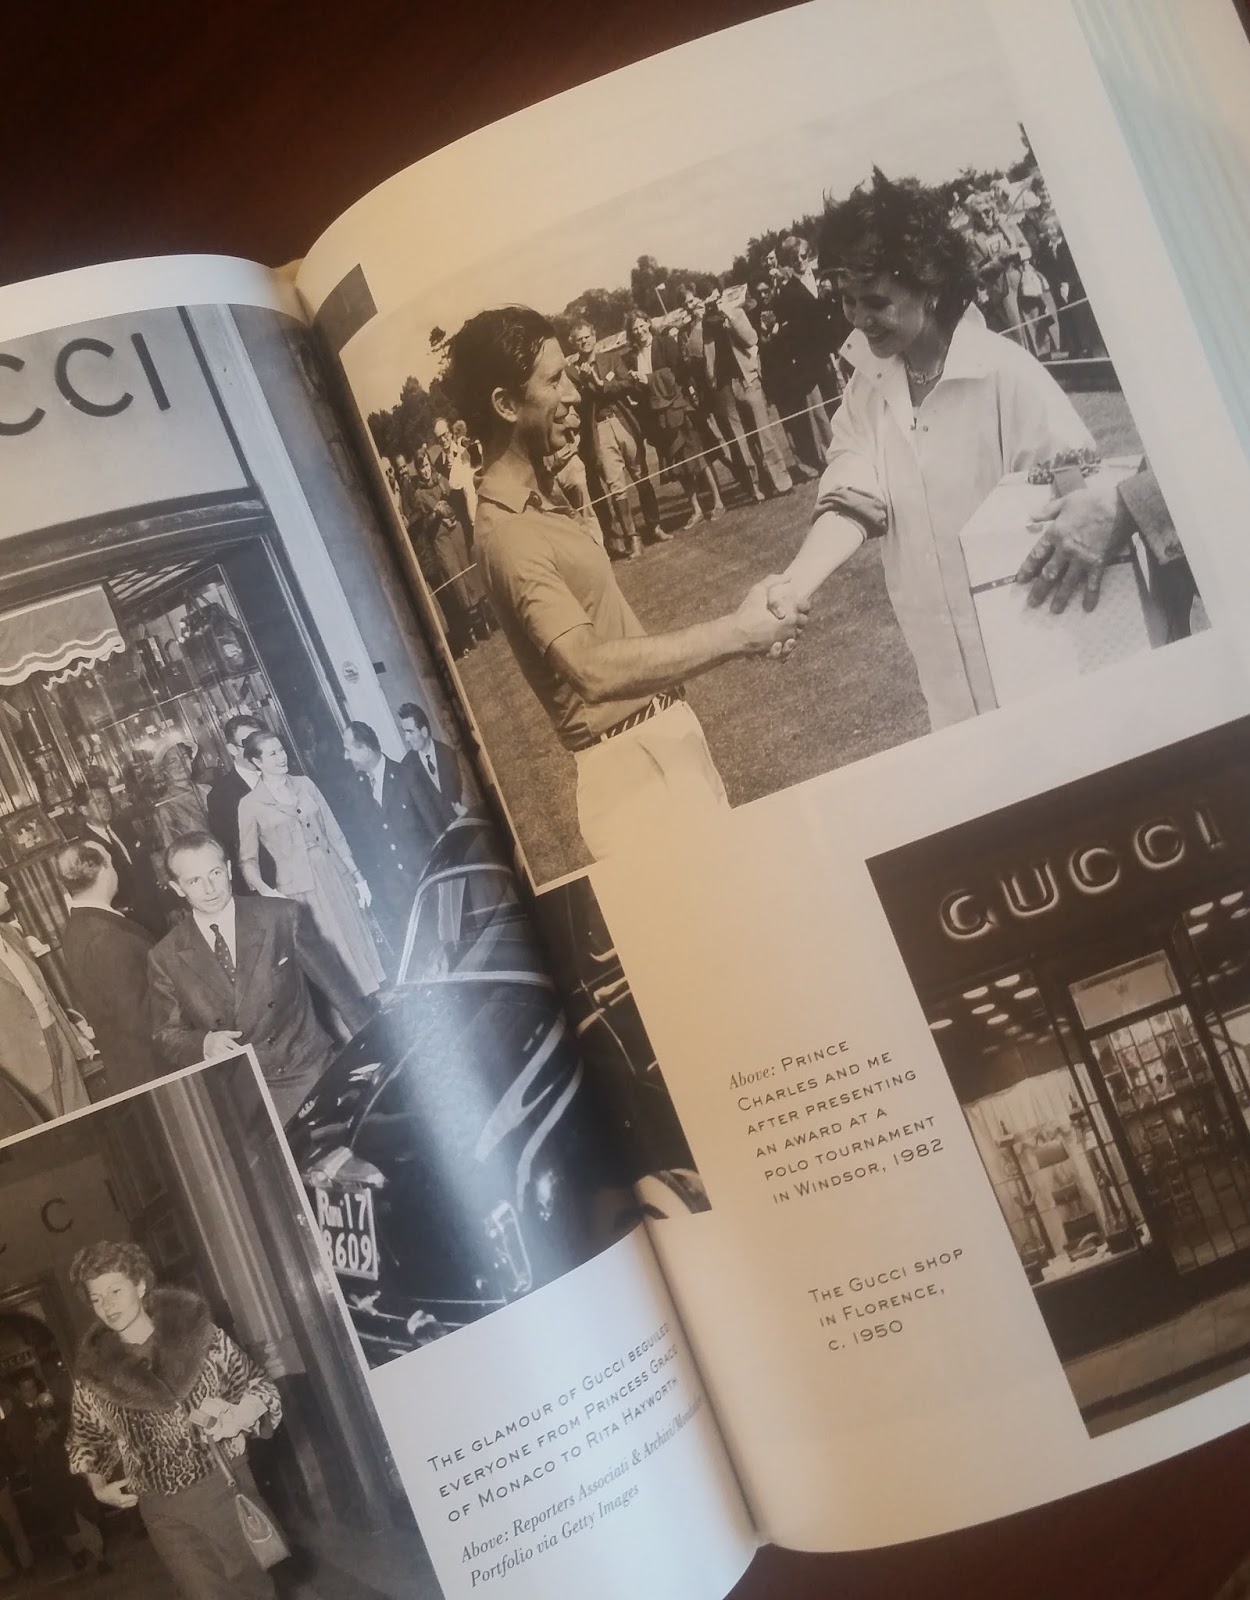 echtgenoot snelheid belasting Currently Reading: In the Name of Gucci | Fashion of Philly